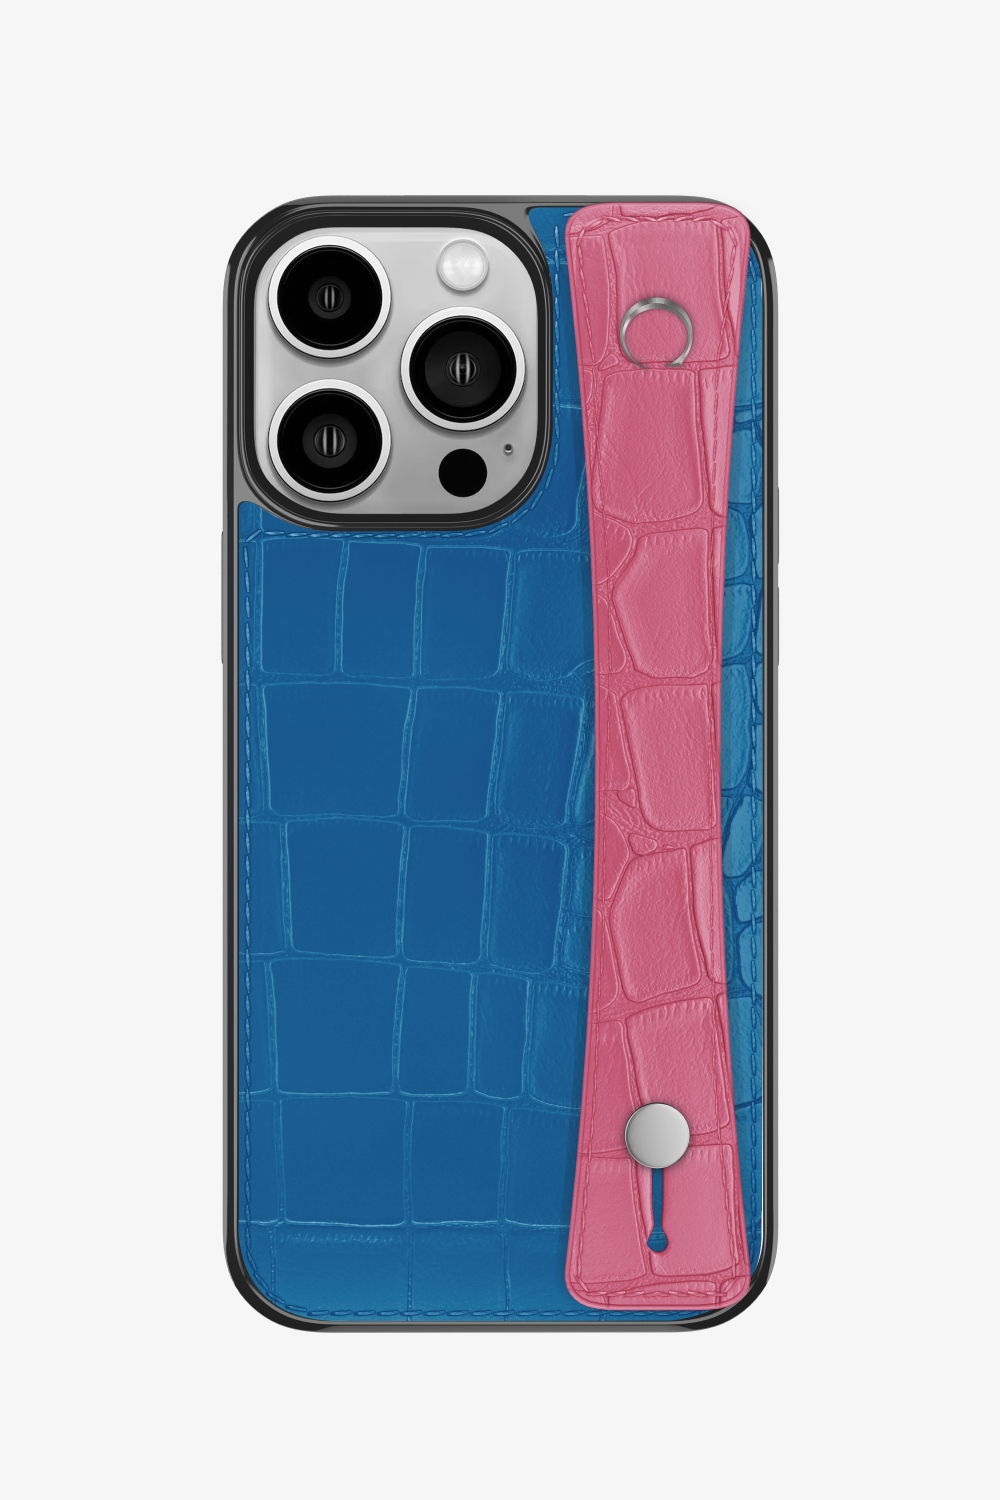 Alligator Sports Strap Case for iPhone 14 Pro - Blue Lagoon / Pink - zollofrance